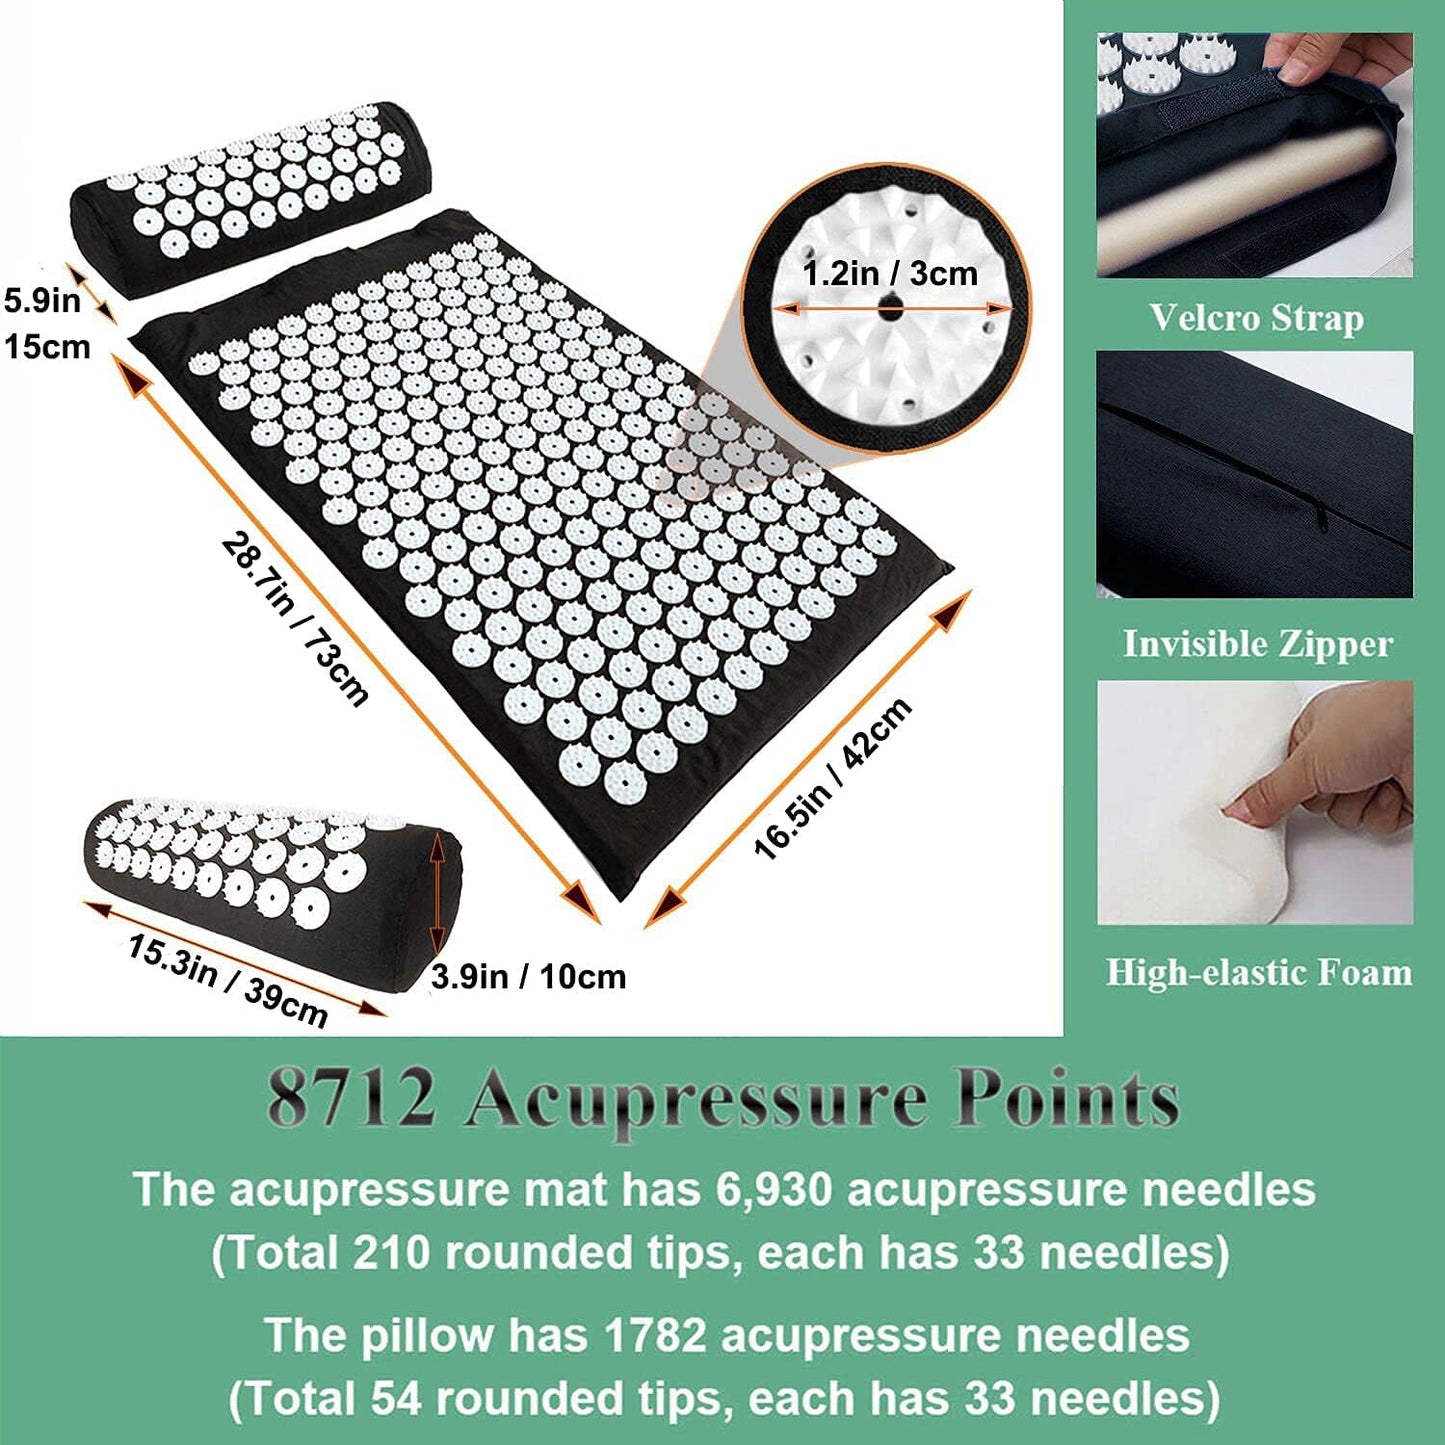 XiaoMaGe Acupressure Mat and Pillow Set with Bag - Large Size 28.7 X 16.5 inch Acupuncture Mat for Neck & Back Pain, Muscle Relaxation Stress Relief, Sciatica Pain Relief Pillow (Black)